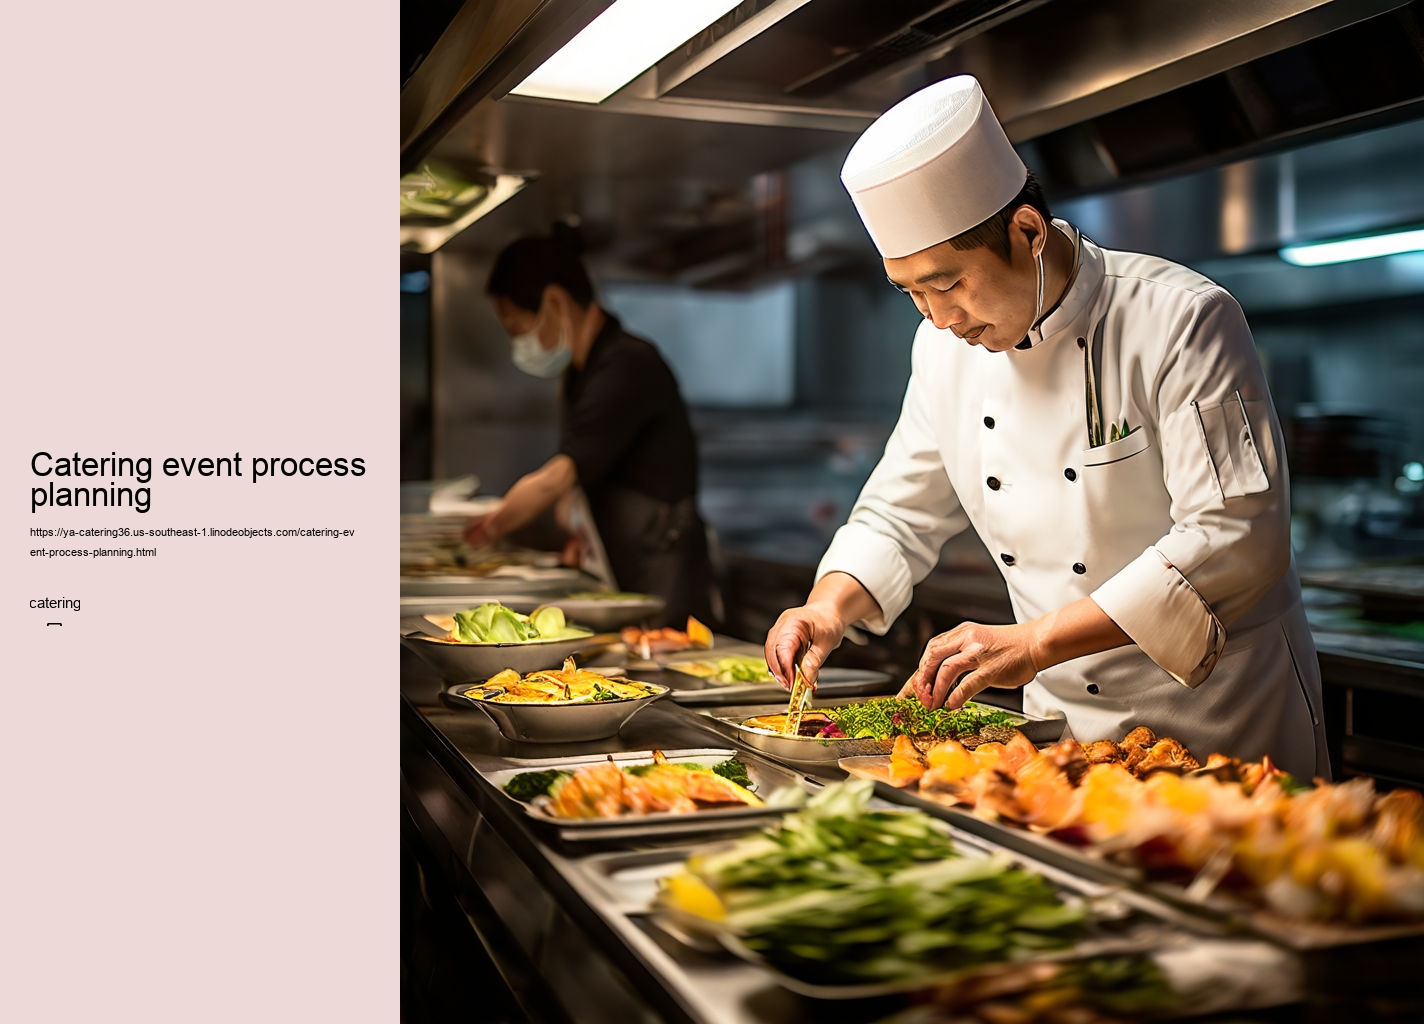 Catering event process planning